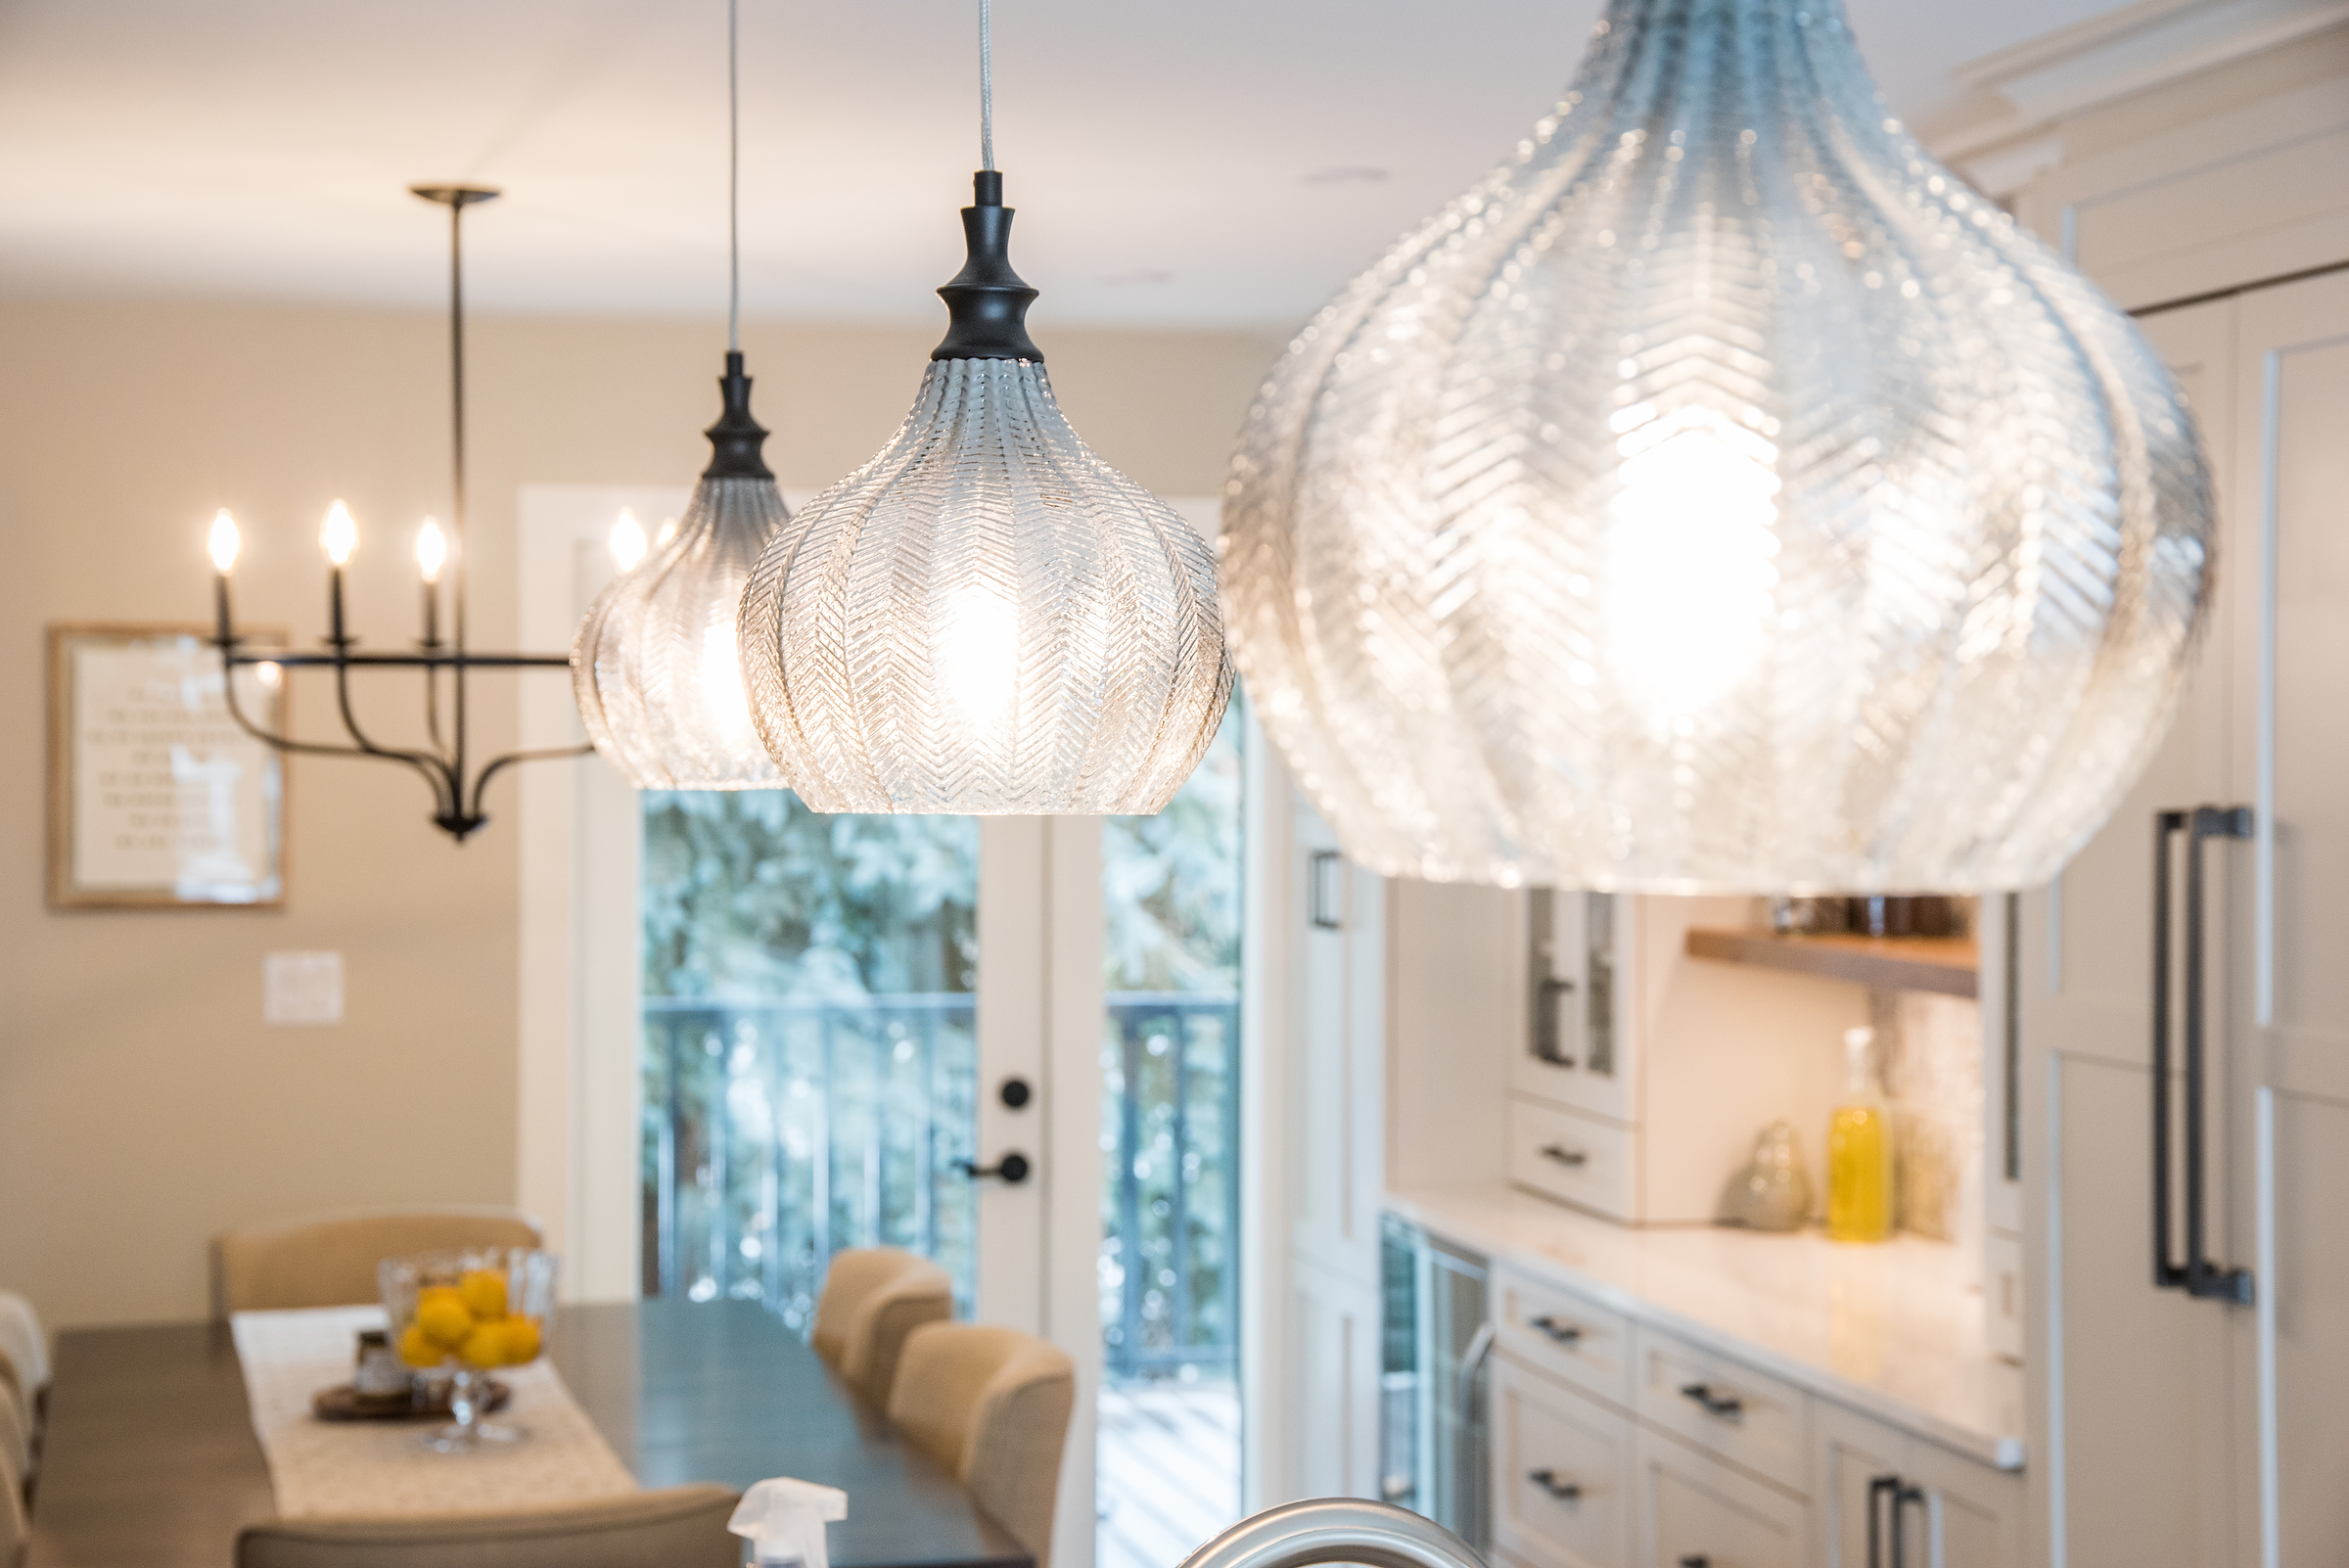 Glass Island pendant lighting set of 3 in kitchen. An Edmonton home and kitchen renovation